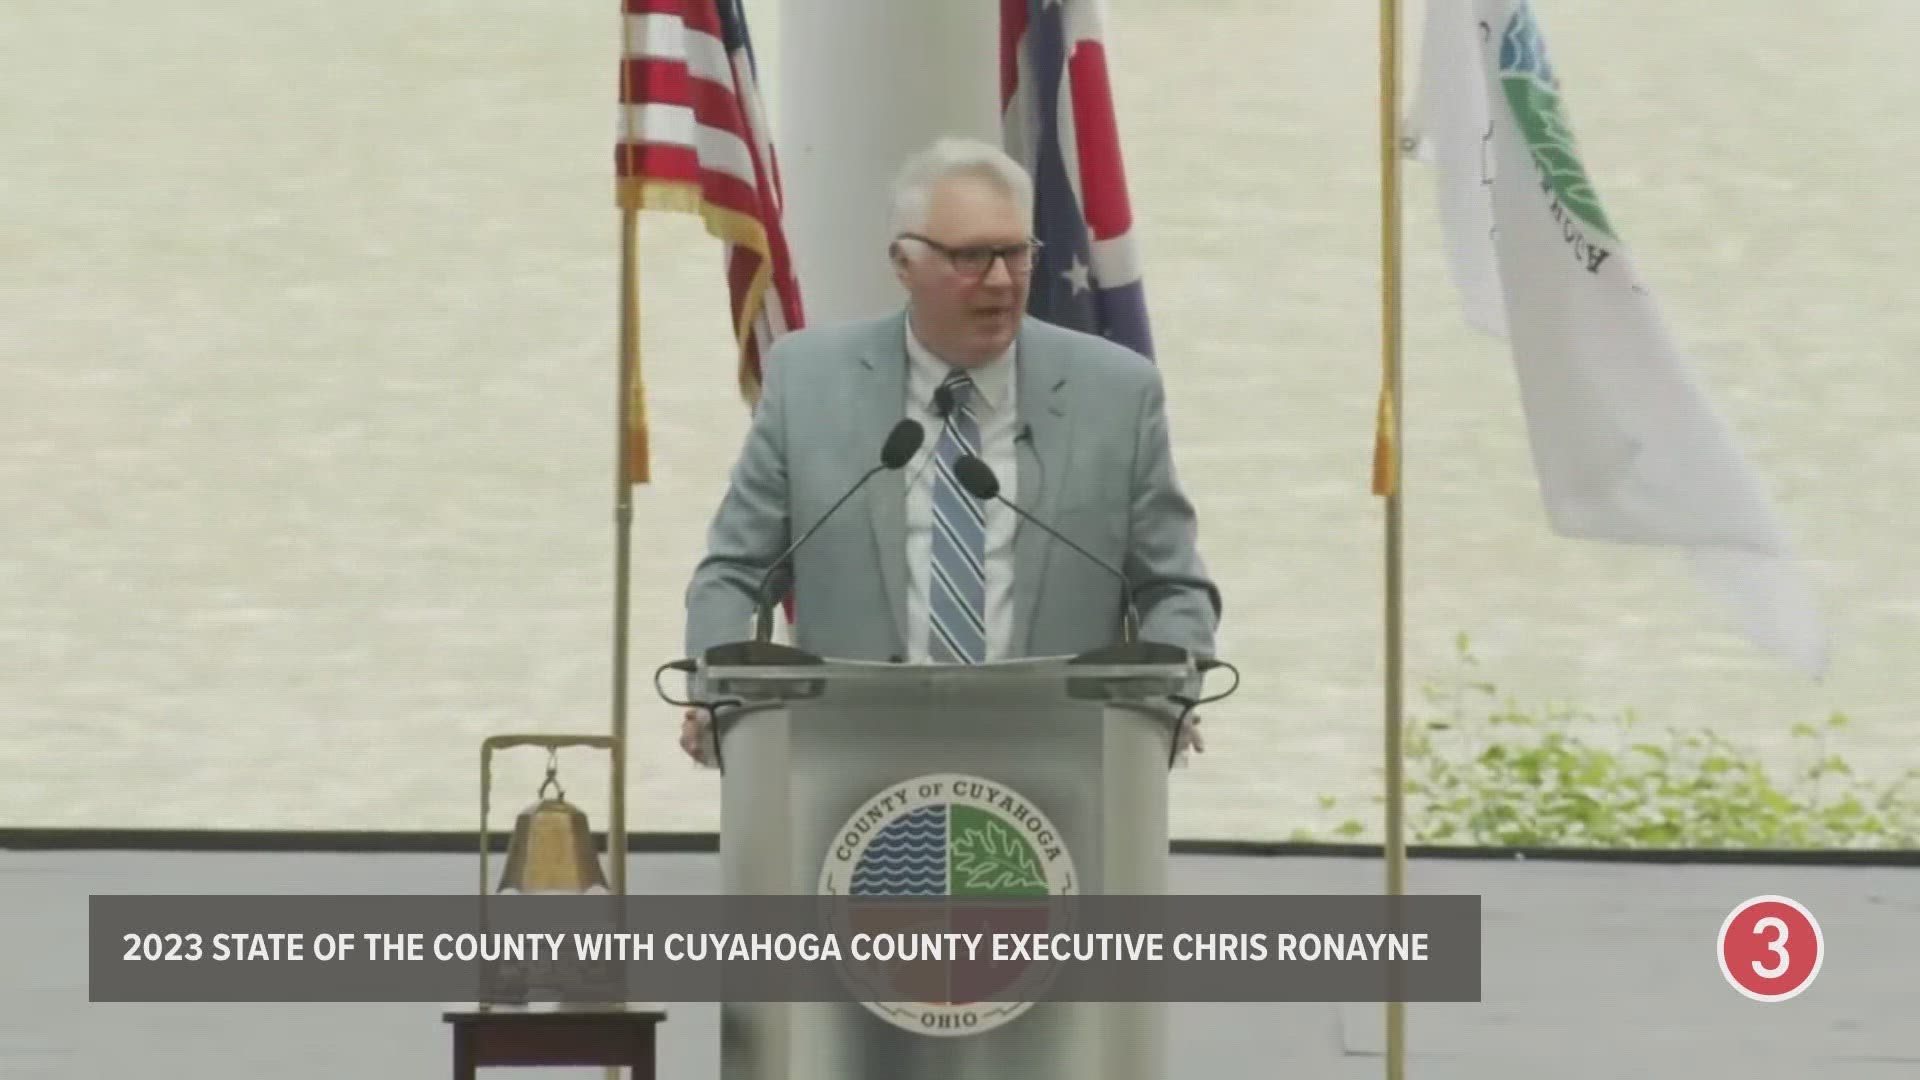 During the 2023 State of the County, Cuyahoga County Executive Chris Ronayne spoke about the Cuyahoga County Jail.